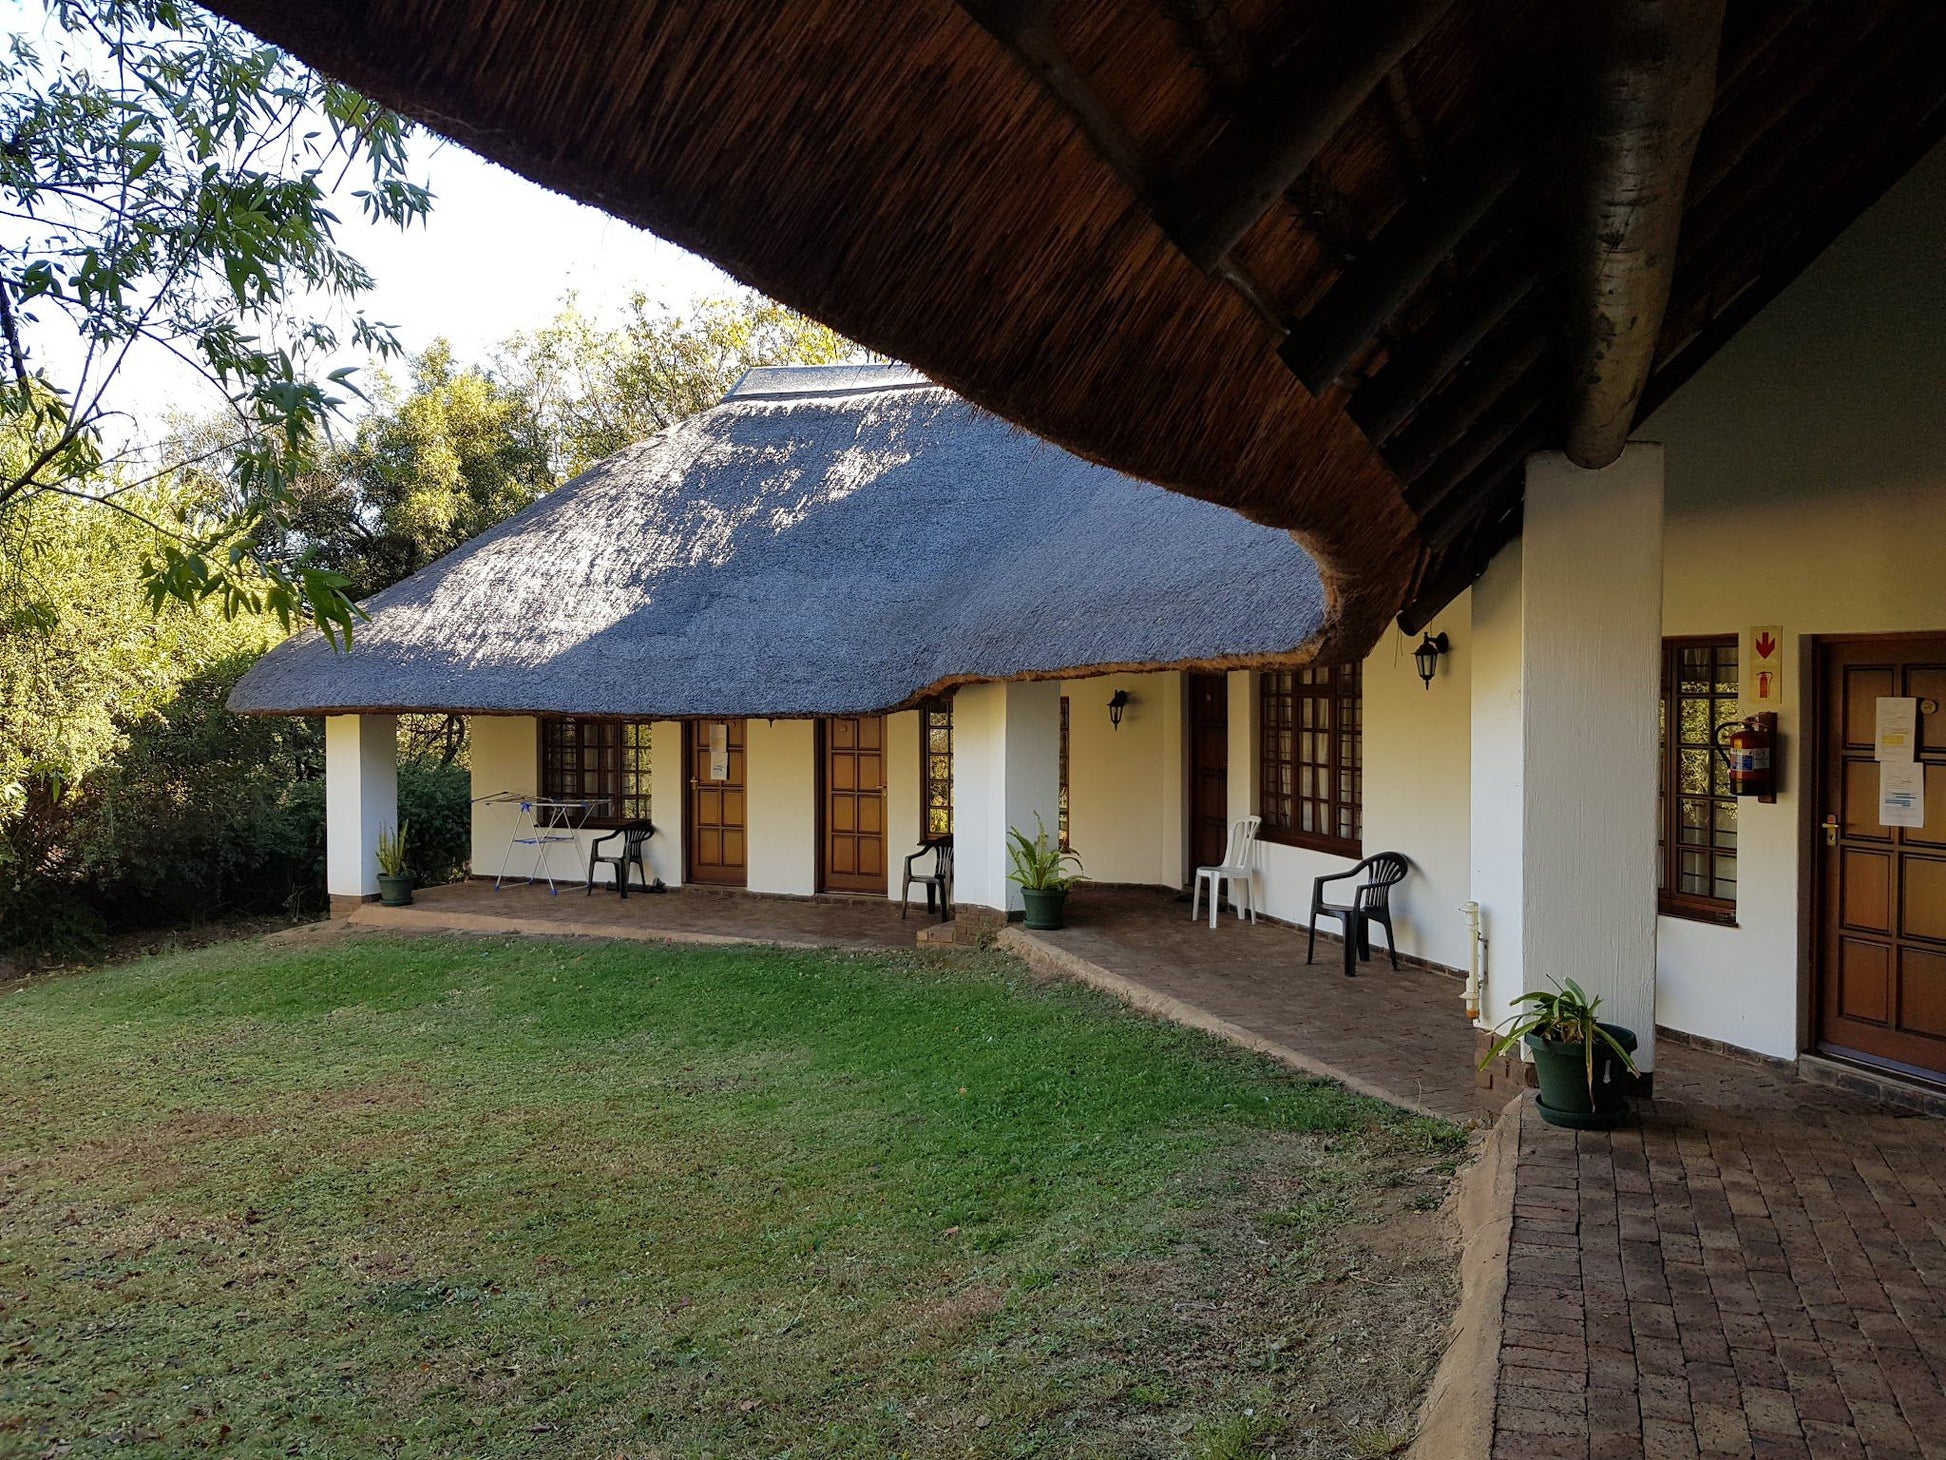 Oaktree Lodge Guest House Kyalami Johannesburg Gauteng South Africa House, Building, Architecture